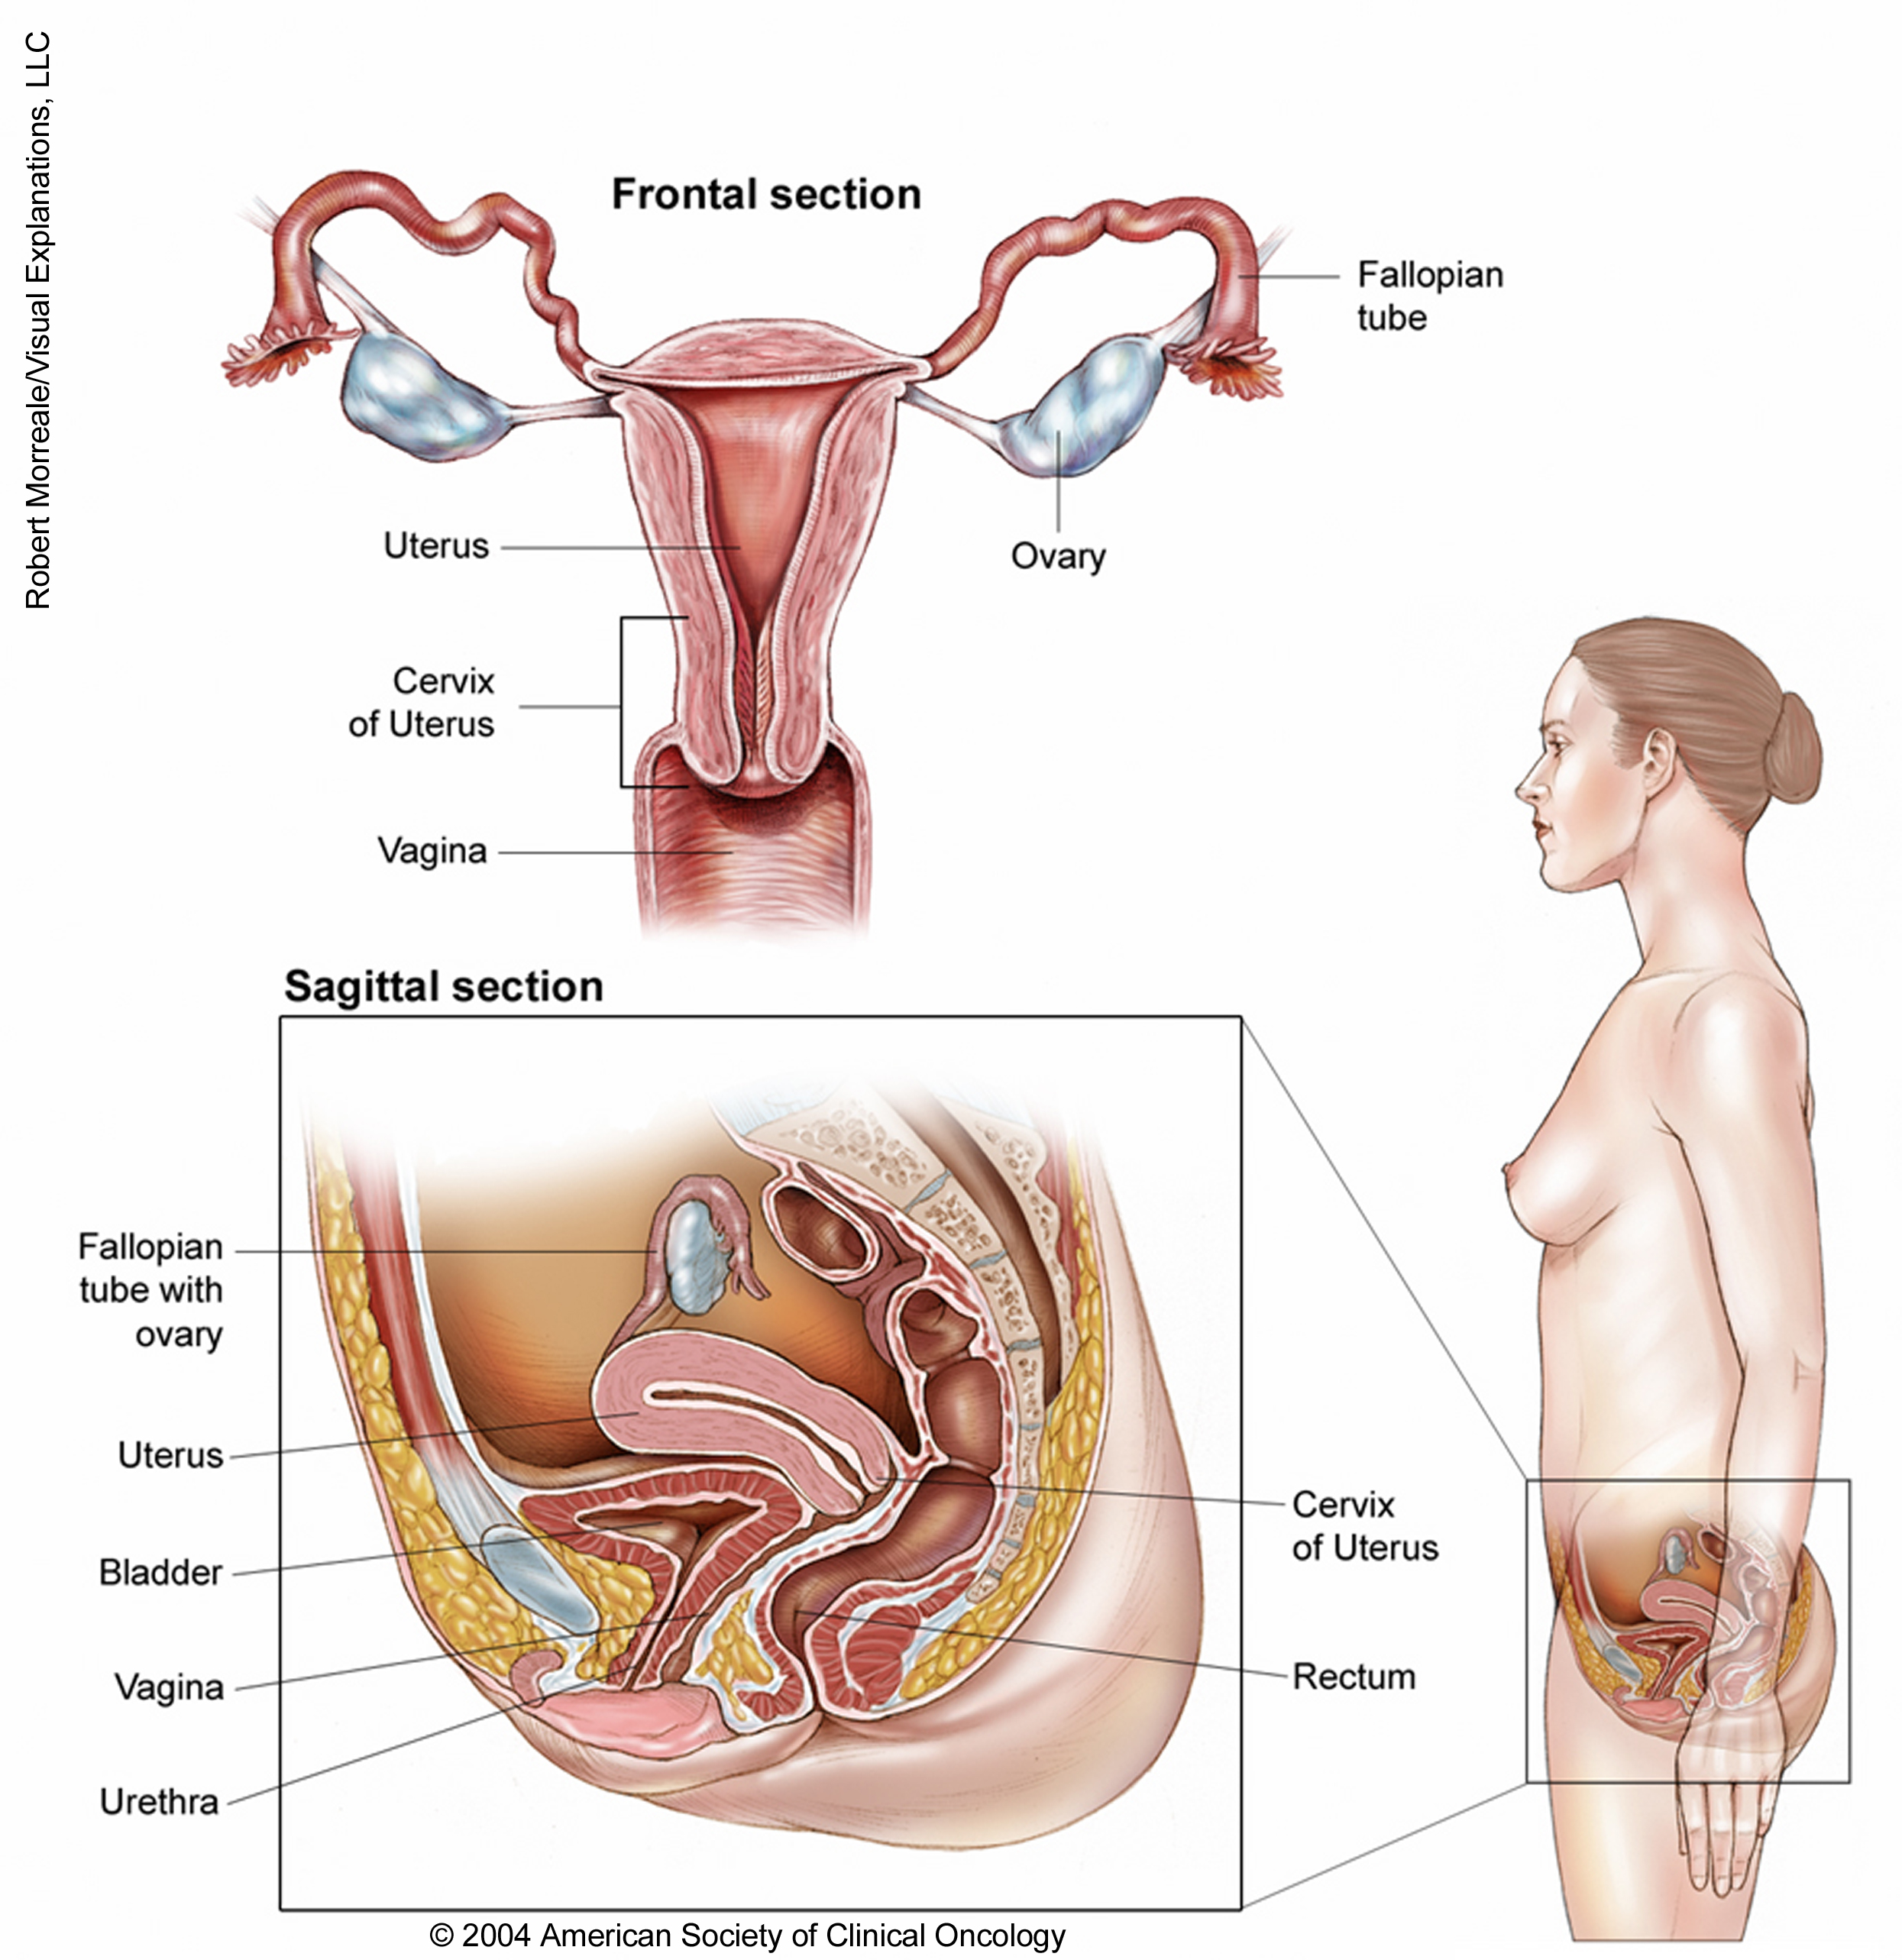 Illustration of the anatomy of the female reproductive system. See description for more information. 